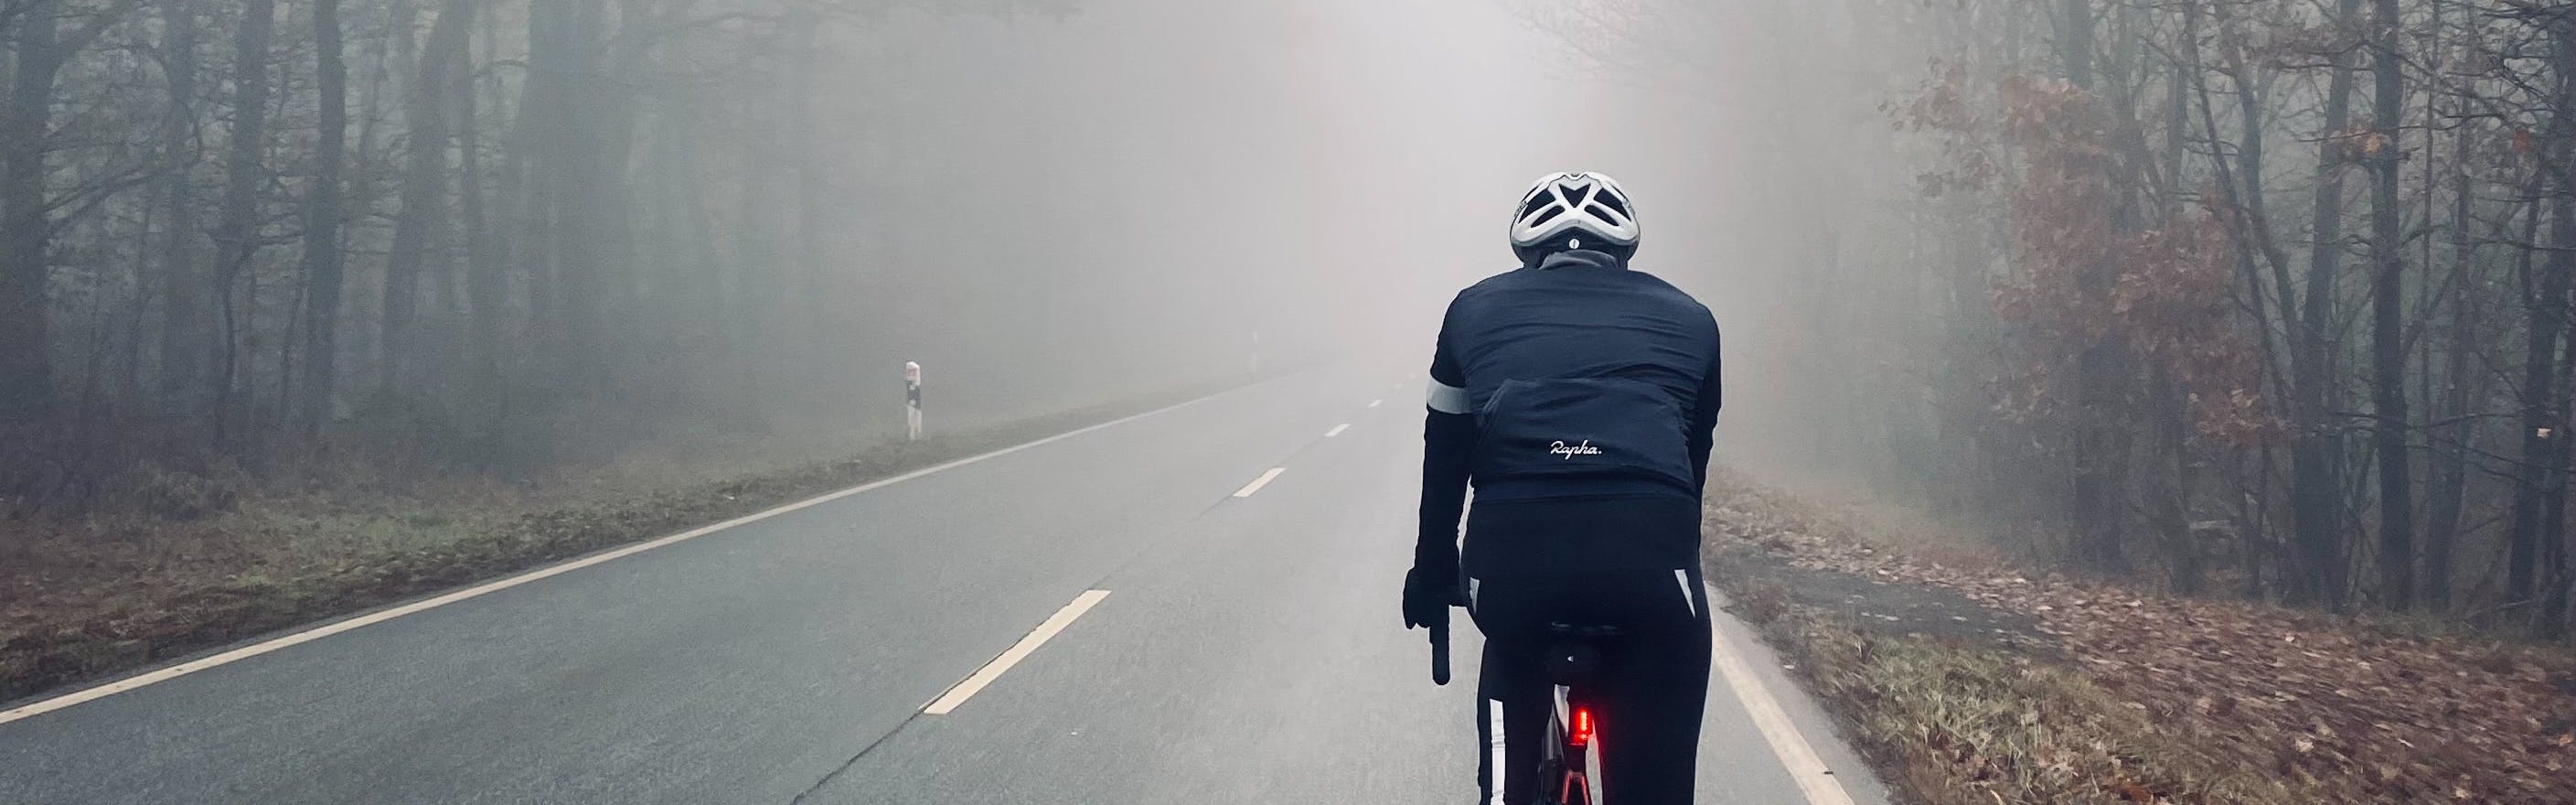 Biking in Cold Weather – An Expert Guide to Winter Cycling Gear: Part I